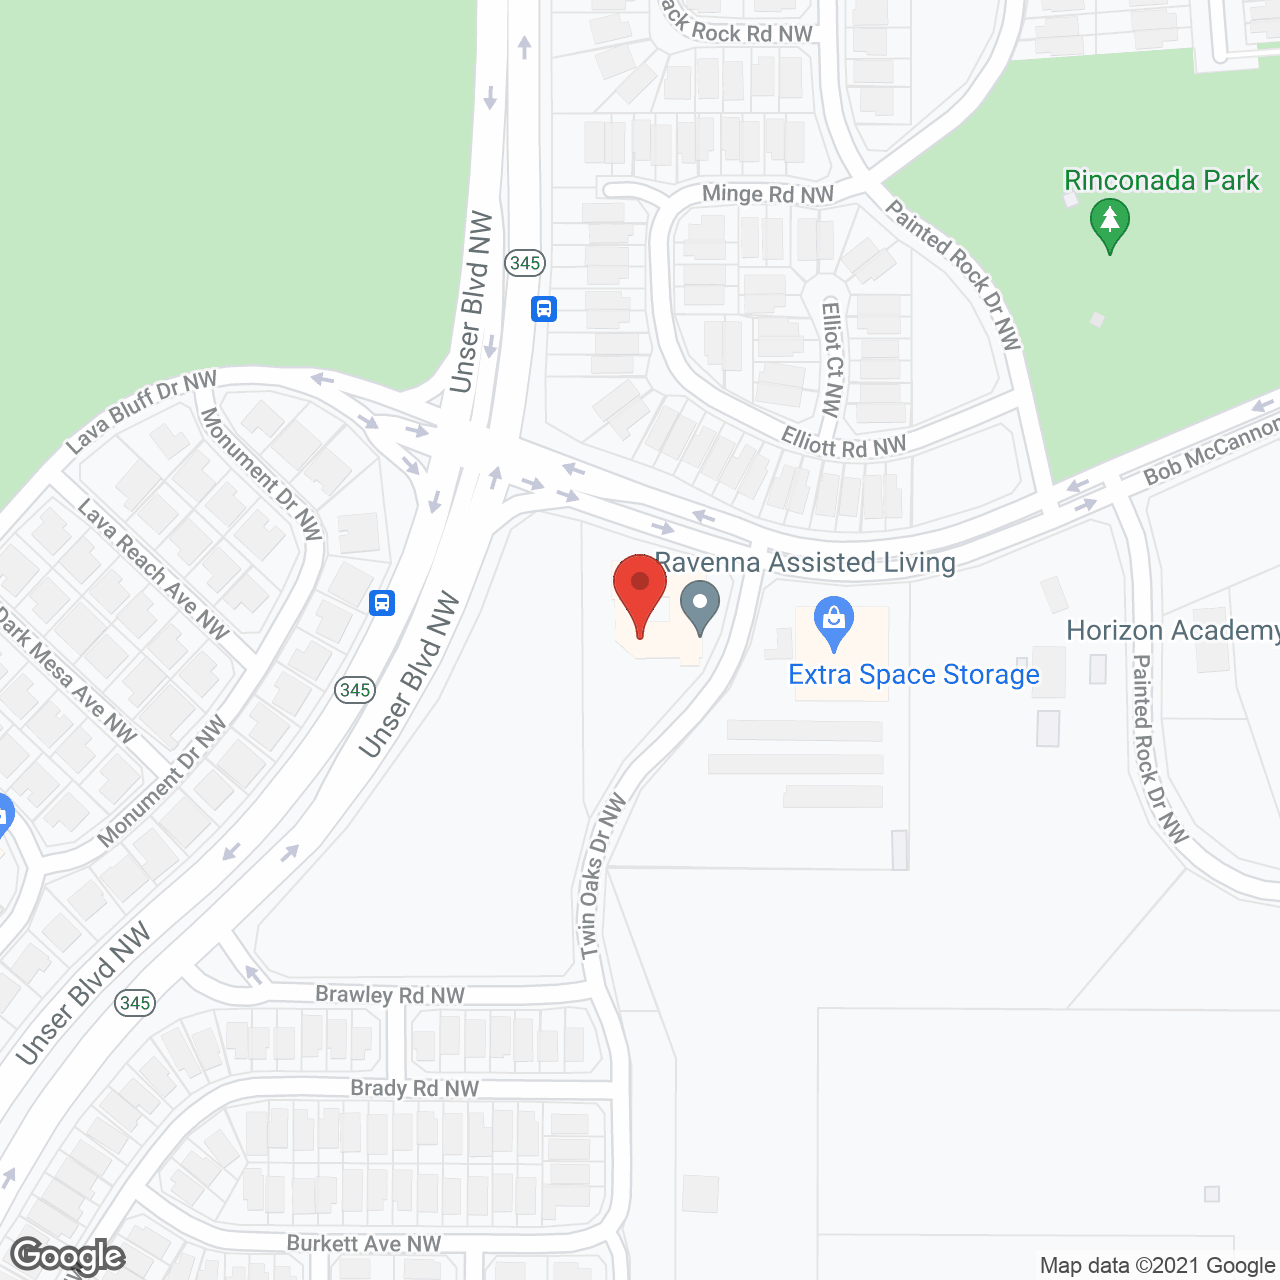 Ravenna Assisted Living in google map